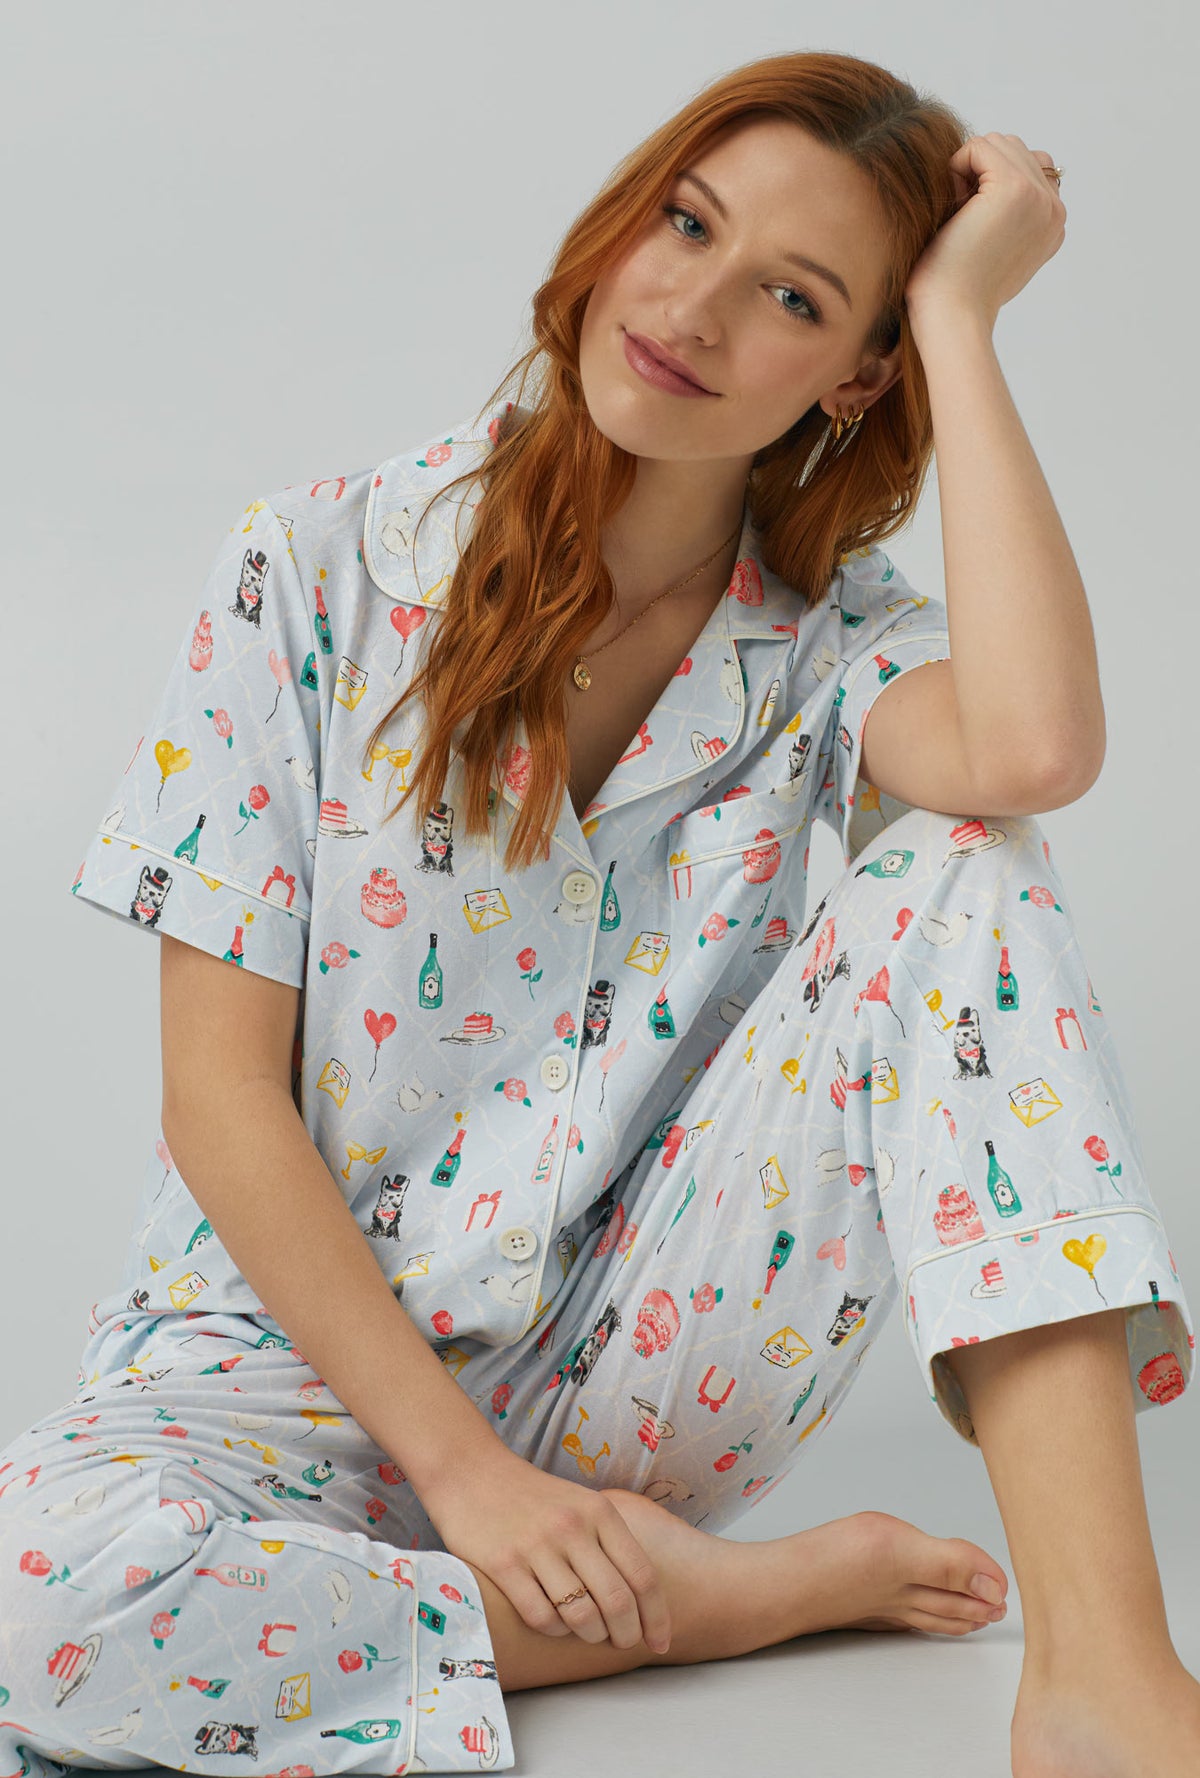 A lady wearing Short Sleeve Classic Stretch Jersey Cropped PJ Set with wedding party print